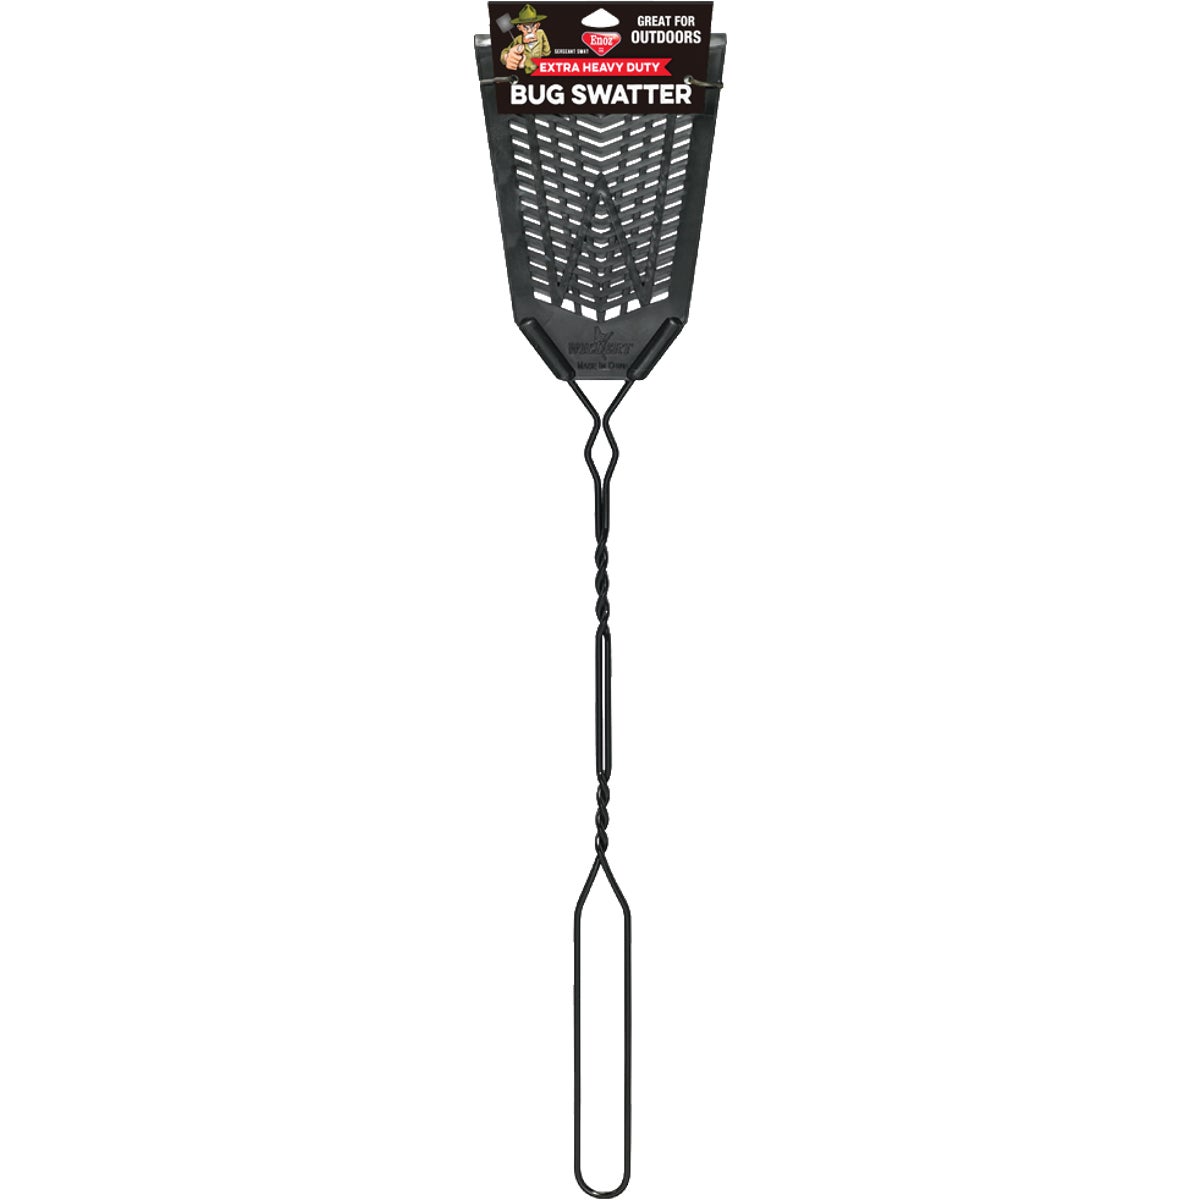 Item 602703, Extra heavy duty bug swatter has a unique vent design that allows quick 